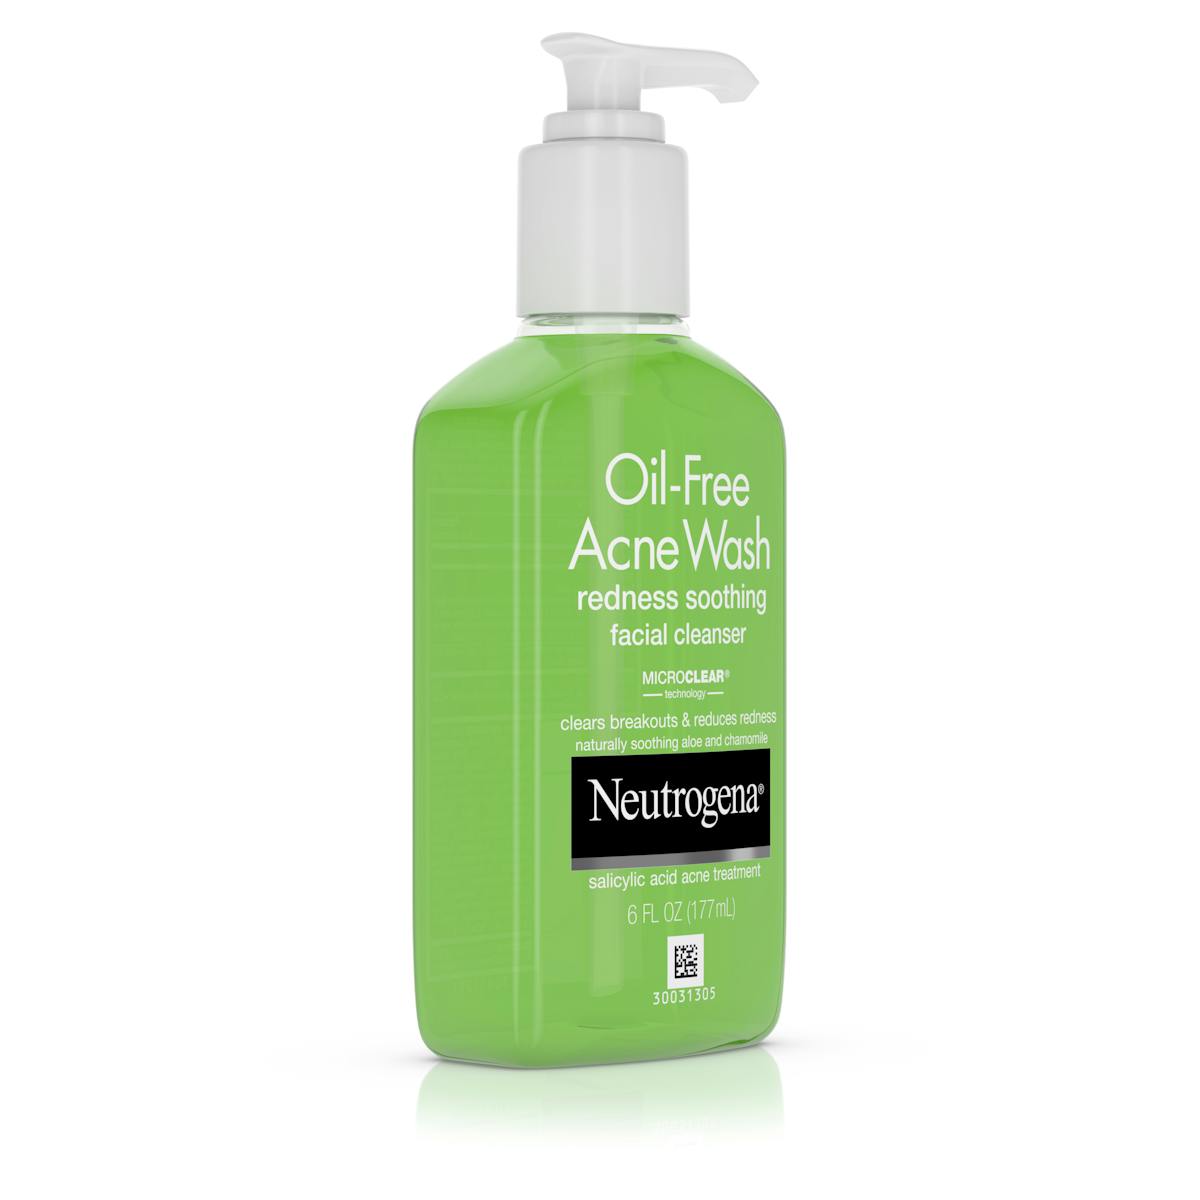 Oil-Free Acne Face Wash Redness Soothing Facial Cleanser ...